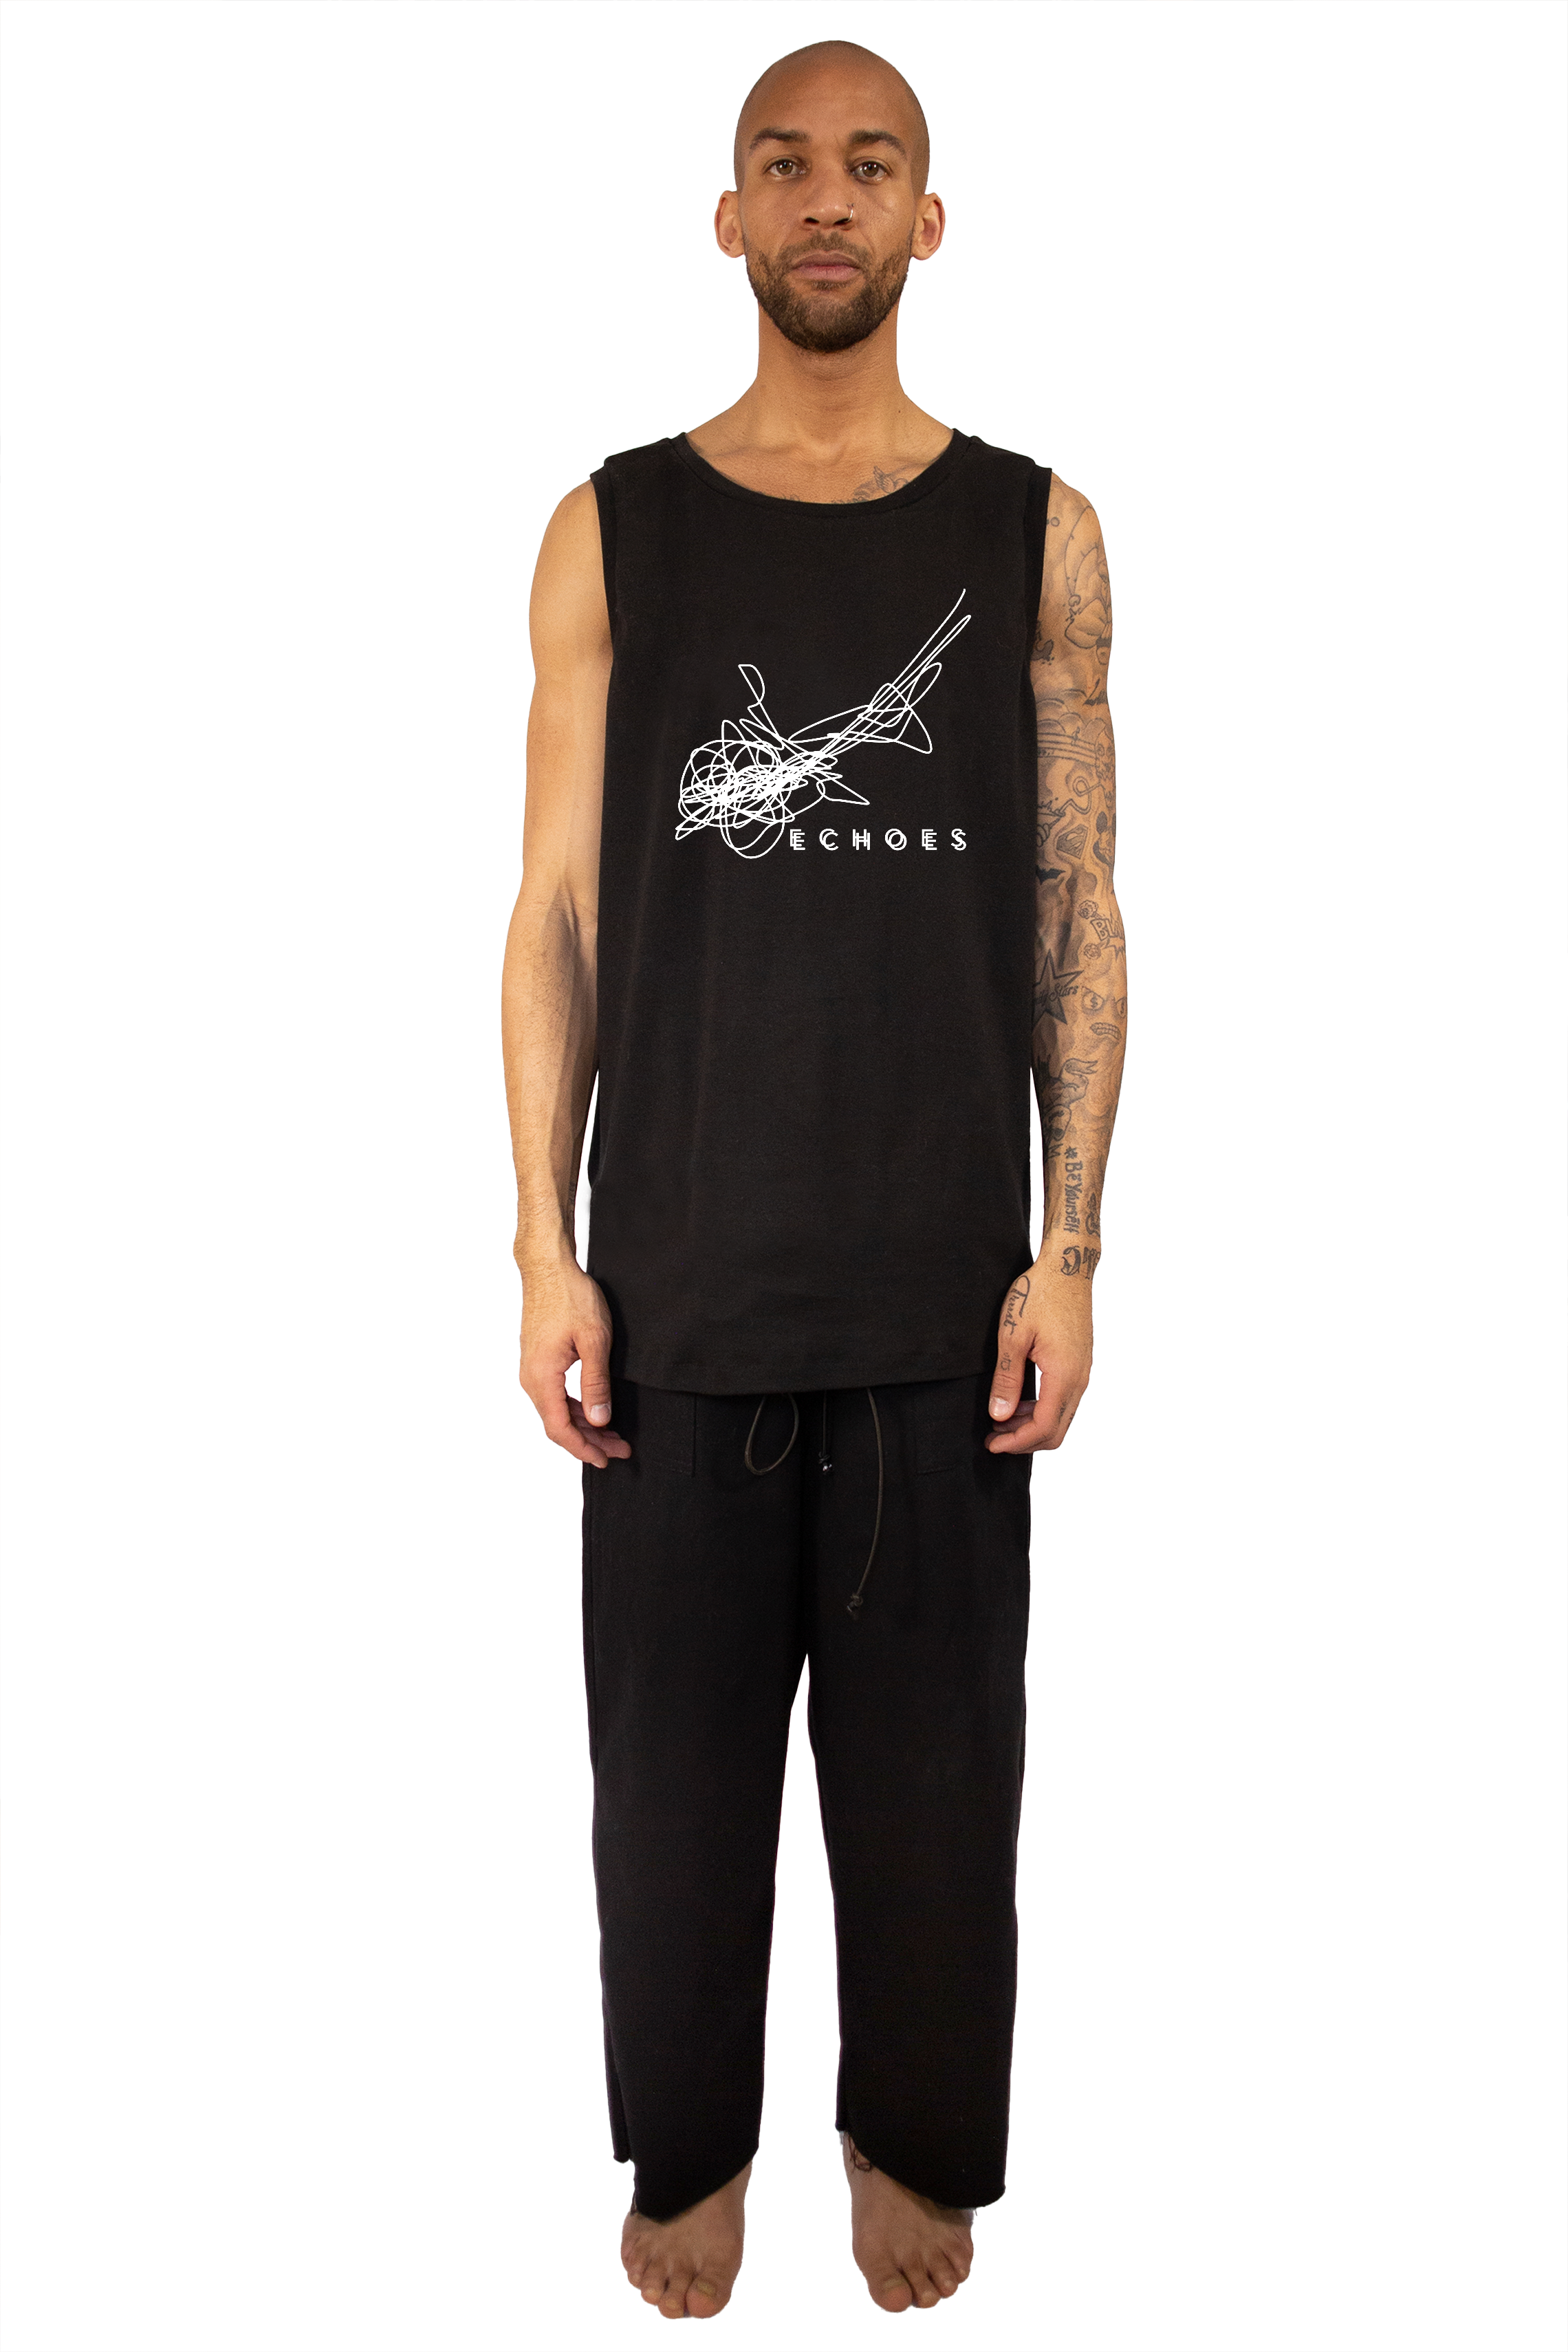 SS2023 ECHOES tanktop